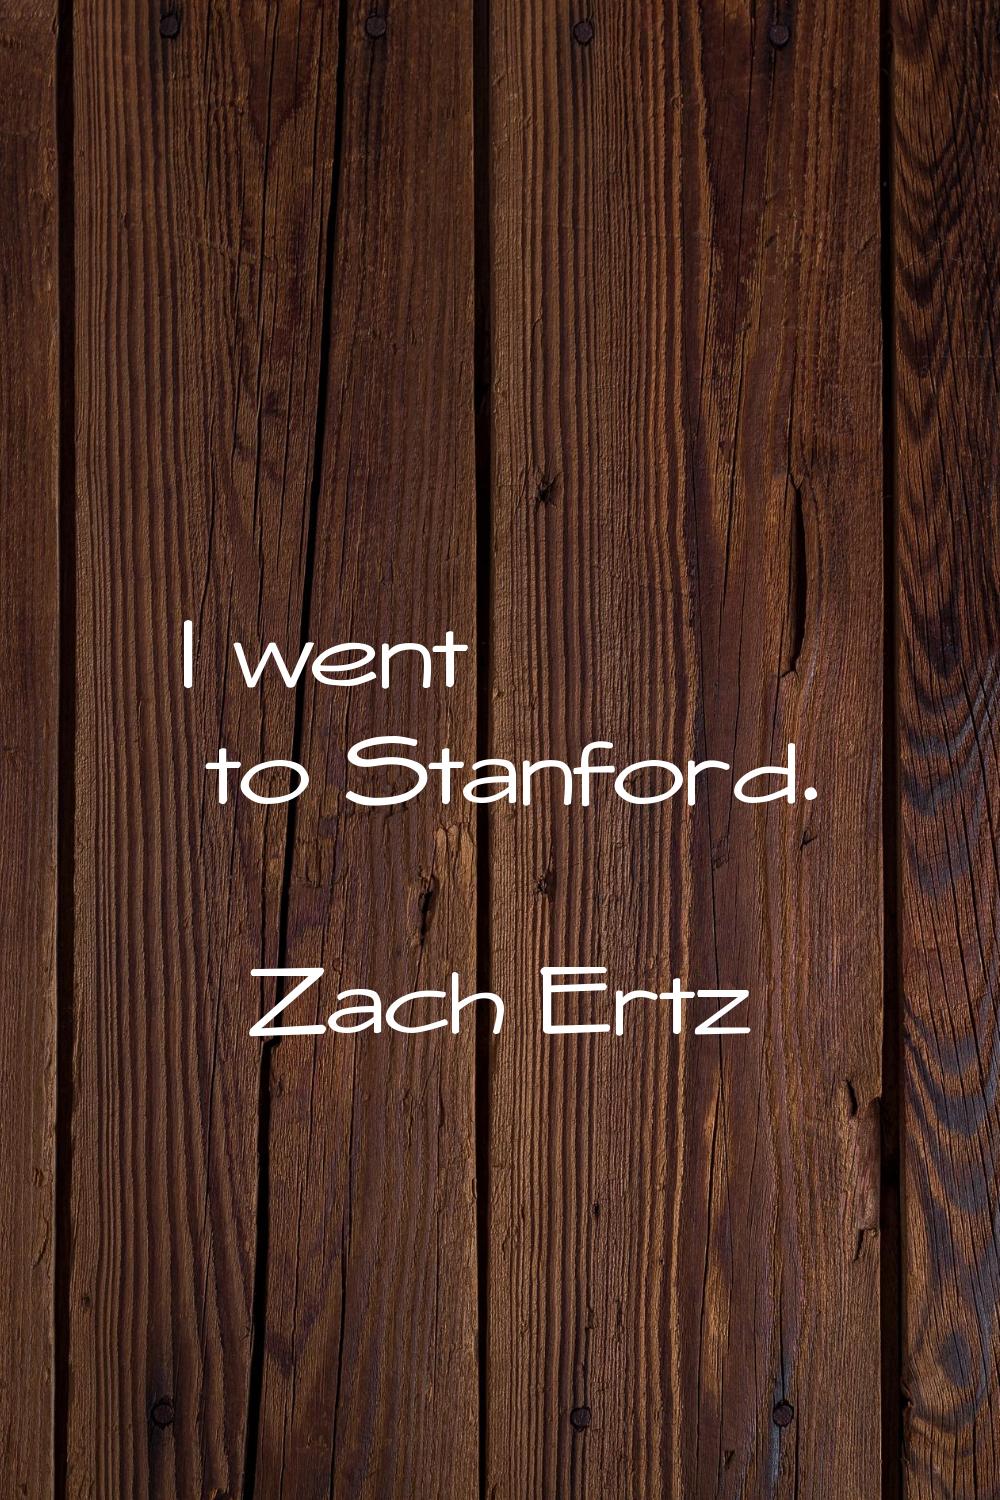 I went to Stanford.